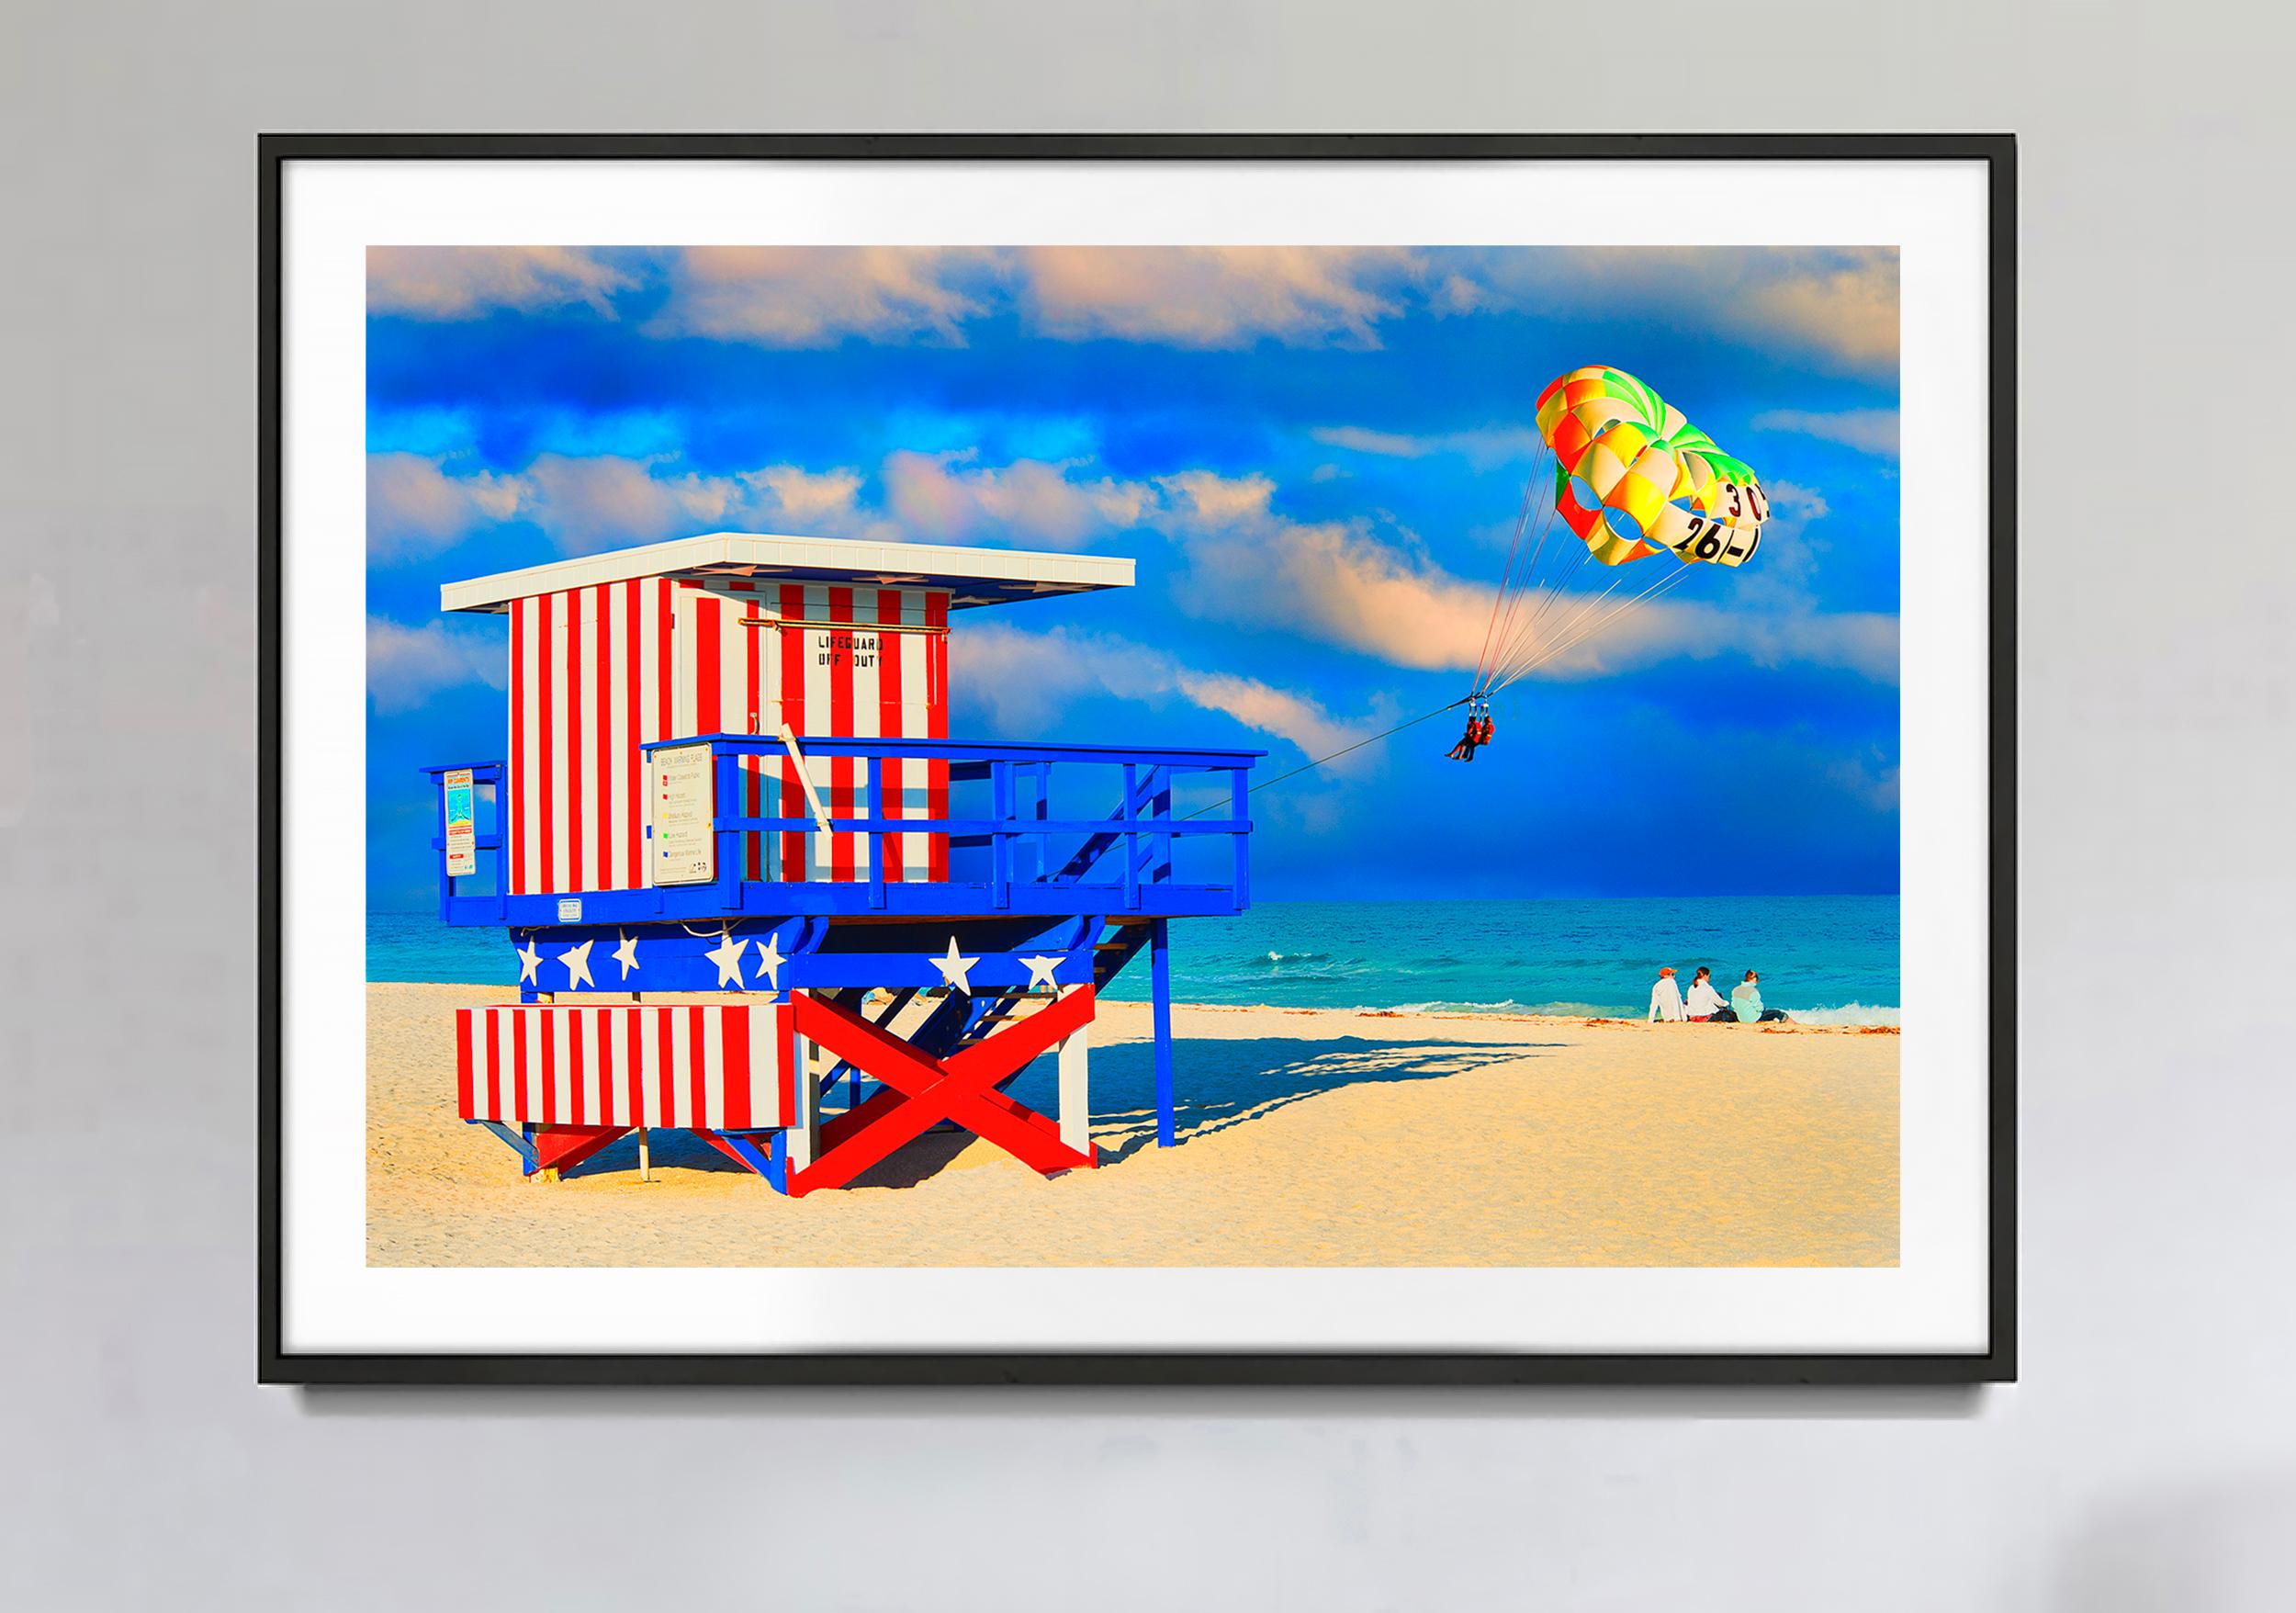 Miami Beach  Lifeguard Tower - Photograph by Mitchell Funk